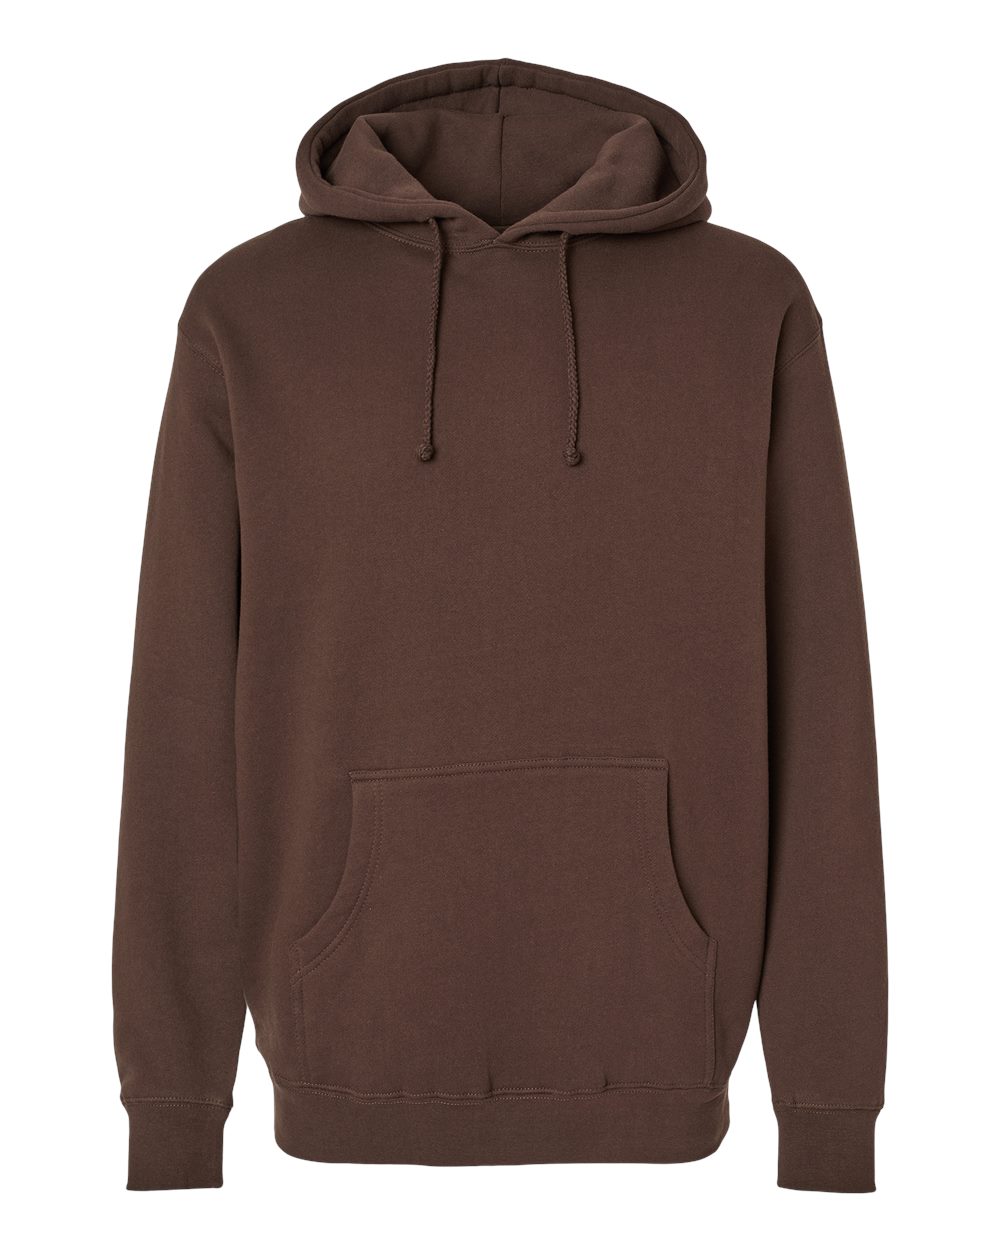 Independent Trading Co. - Heavyweight Hooded Sweatshirt - IND4000 - Safety  Orange